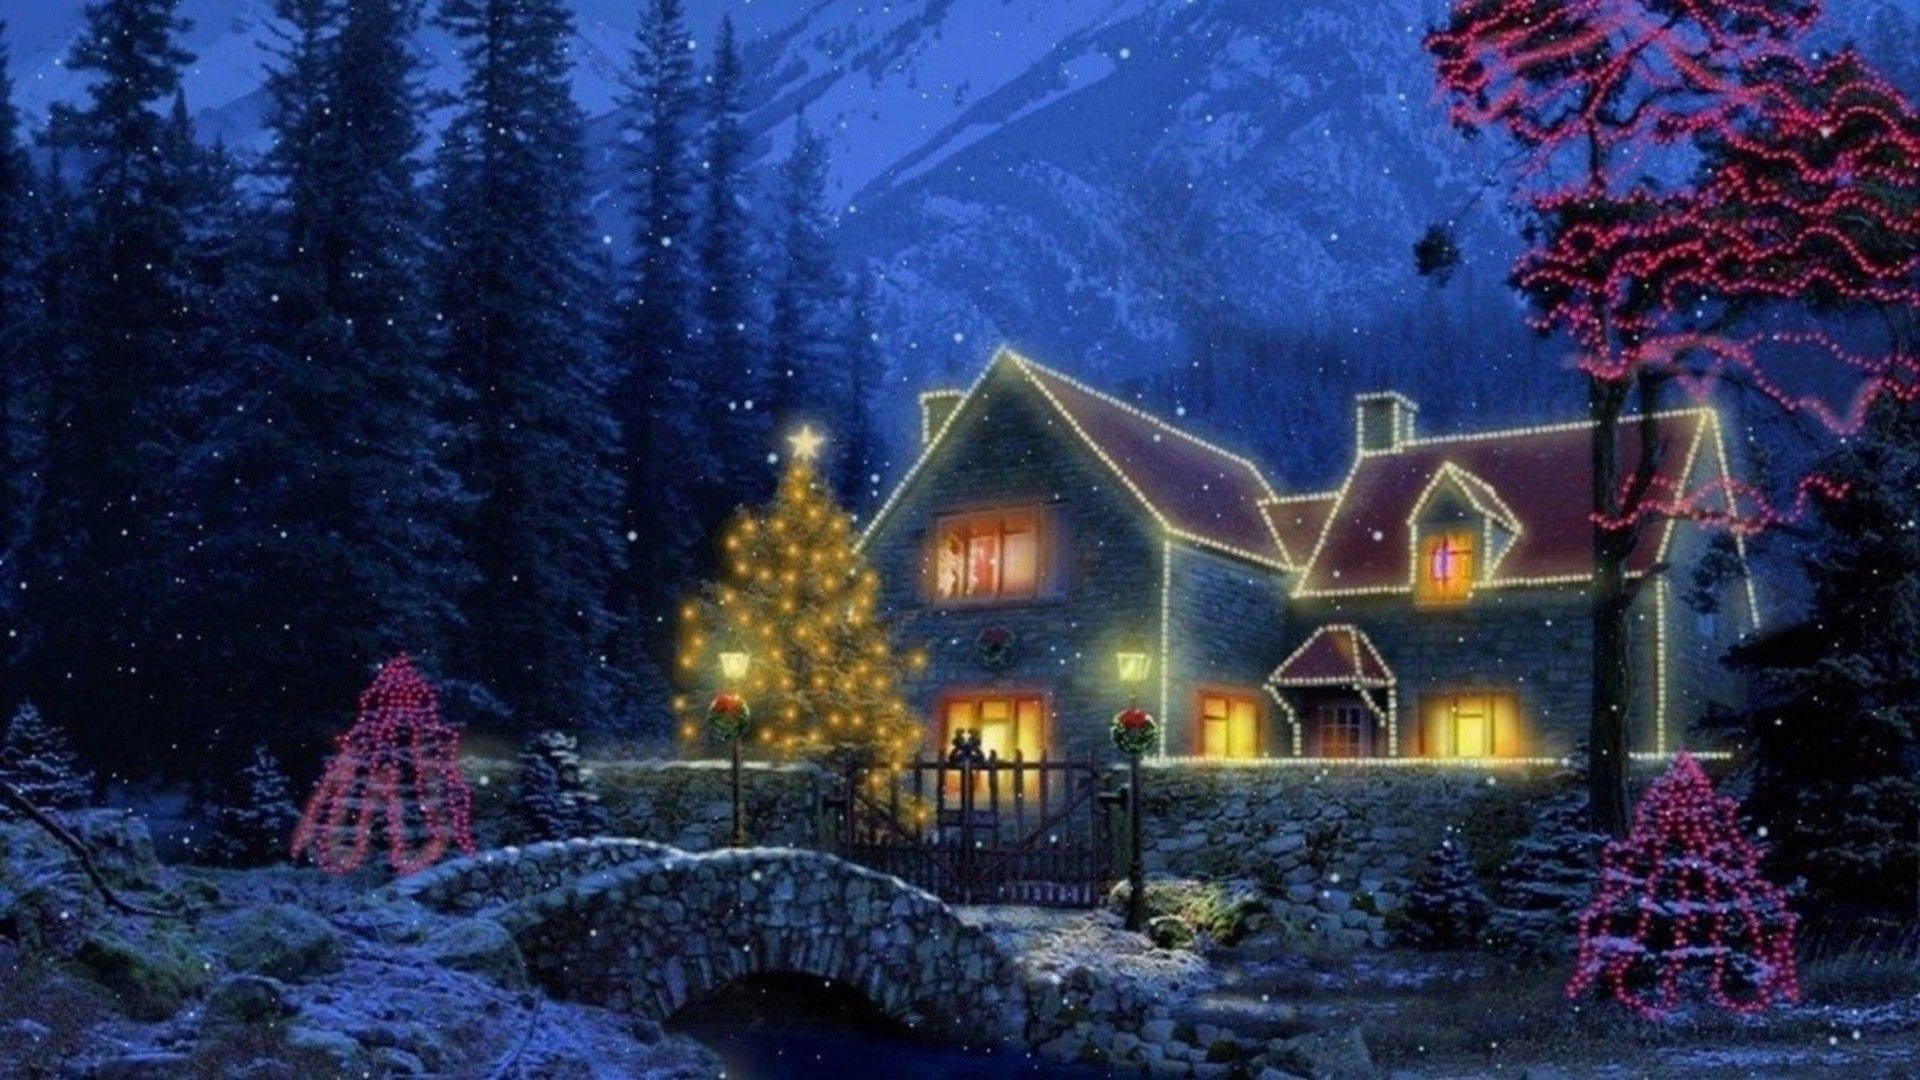 Snowy Cottage Wallpapers - Top Free Snowy Cottage Backgrounds ...